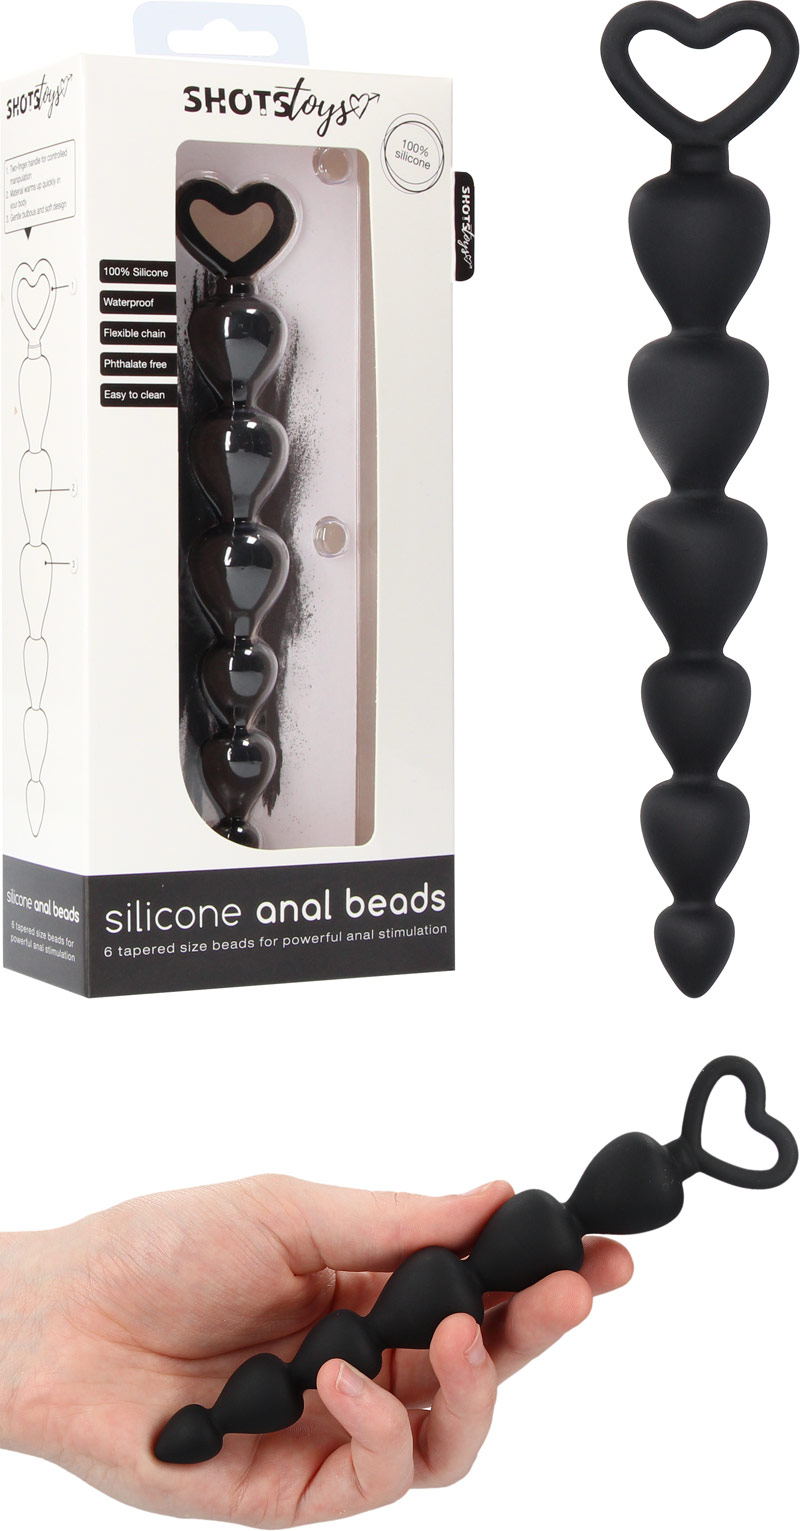 ShotsToys Silicone Anal Beads in silicone